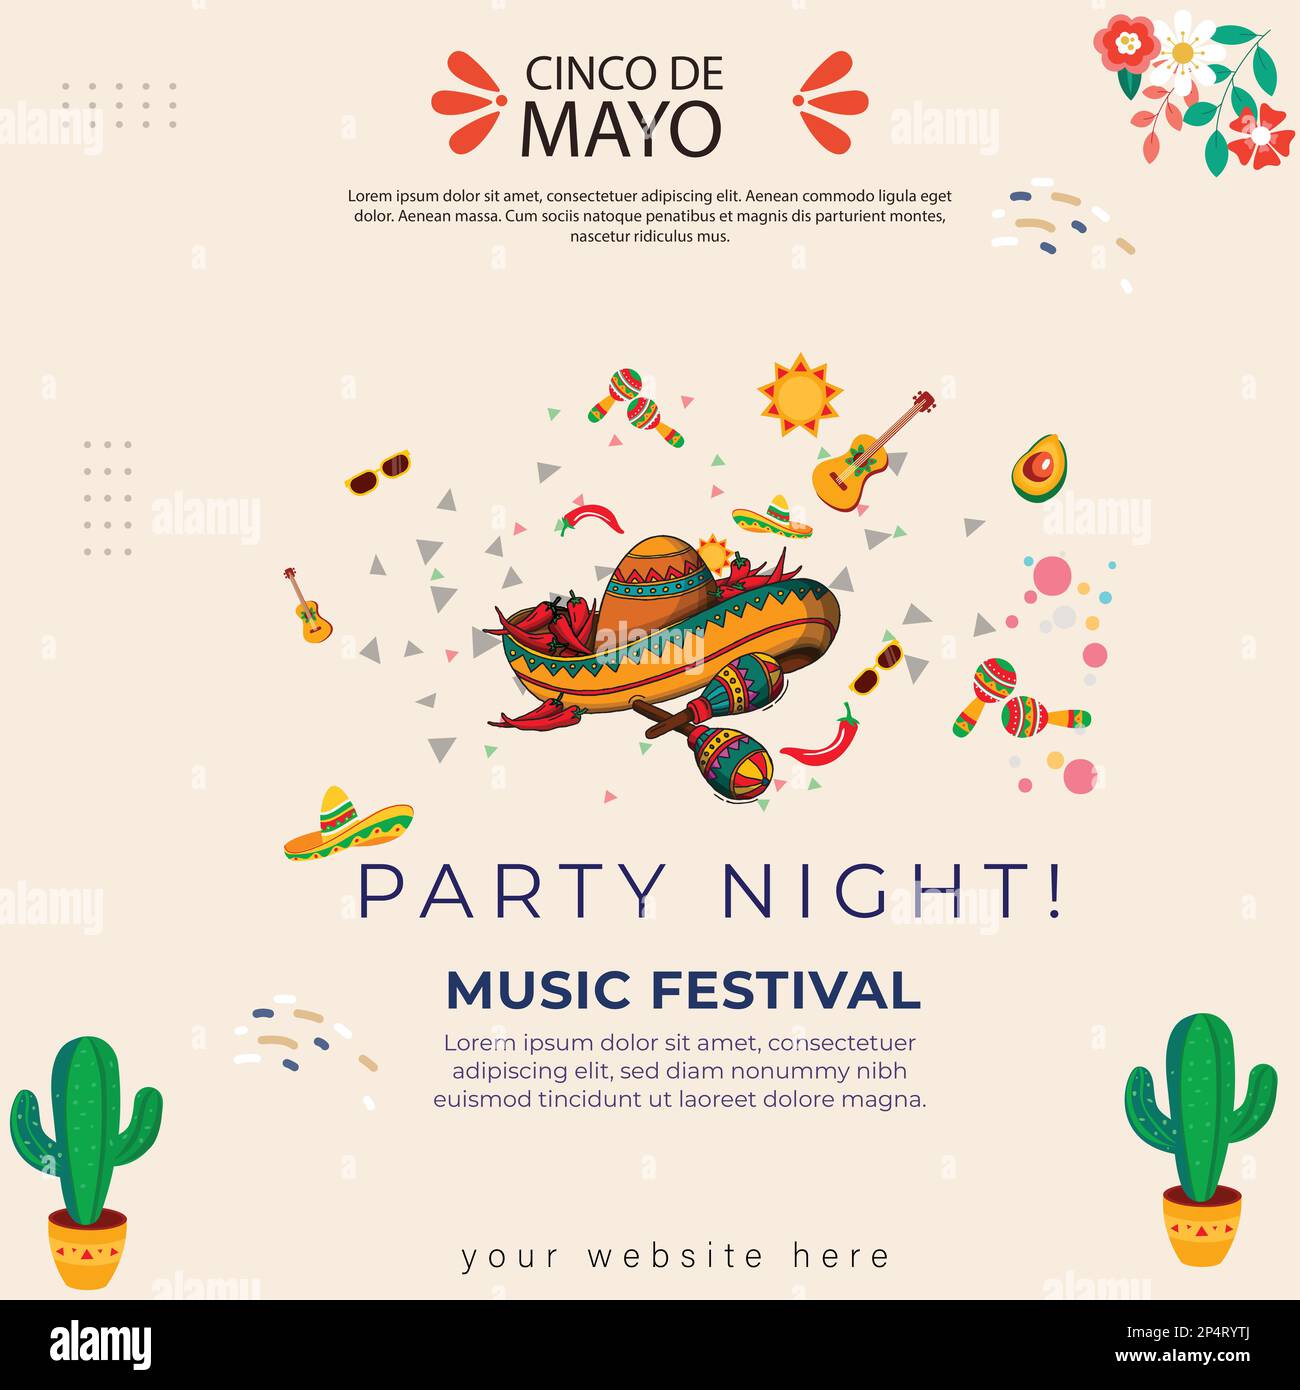 Cinco de Mayo - May 5, Music Festival in Mexico. with flags, flowers, decorations Stock Vector